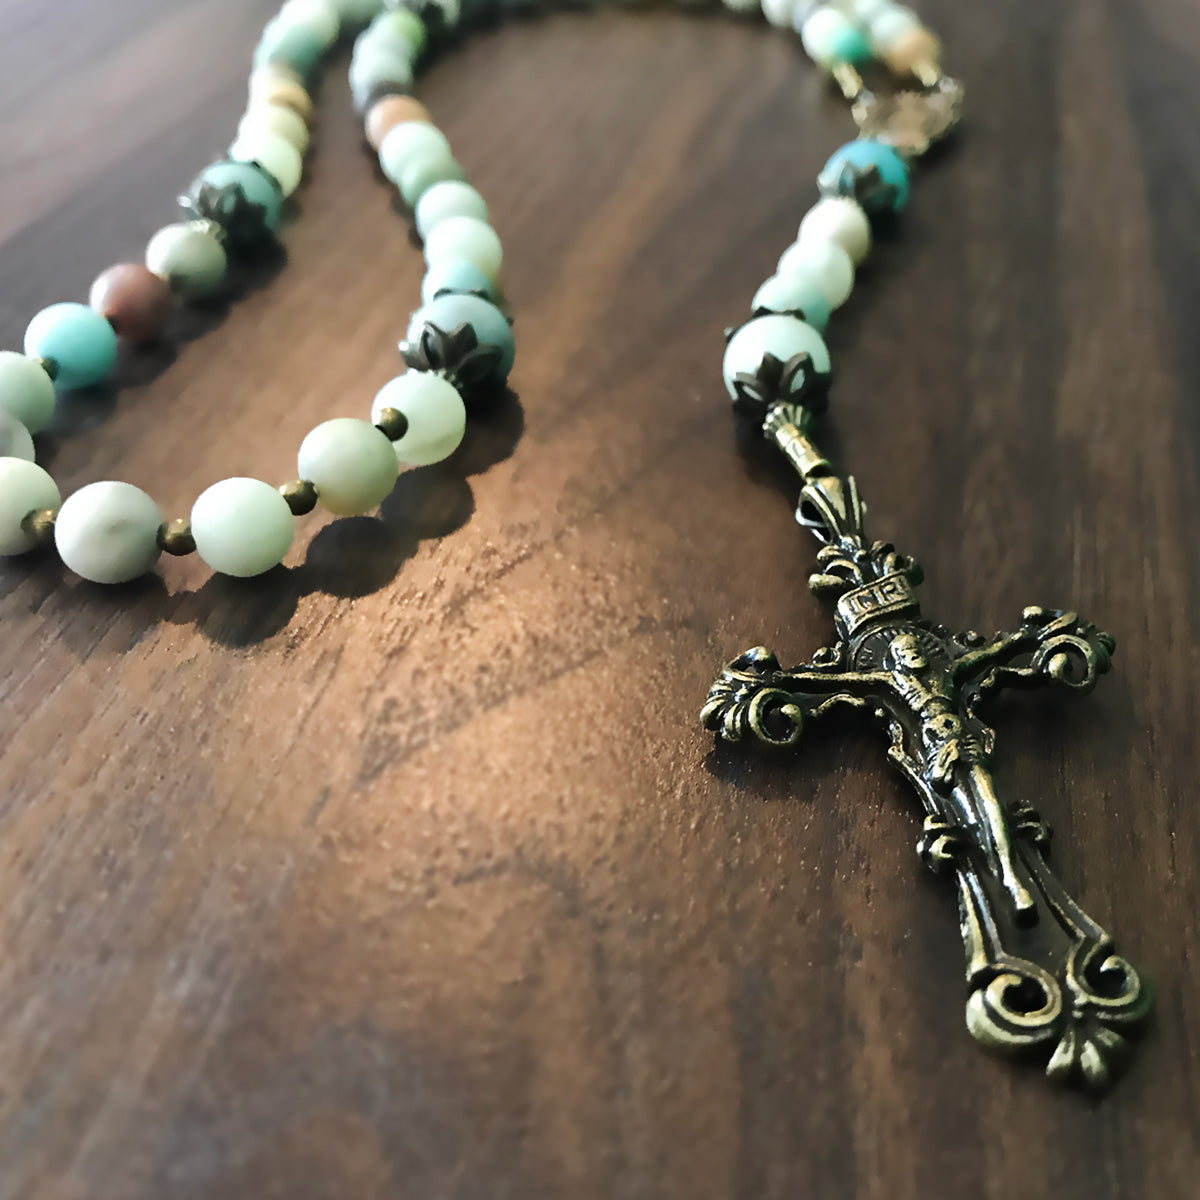 Amazonite Stone Rosary With Miraculous Medal by Catholic Heirlooms - Confirmation - Holy Communion Gift - Rosary Necklace